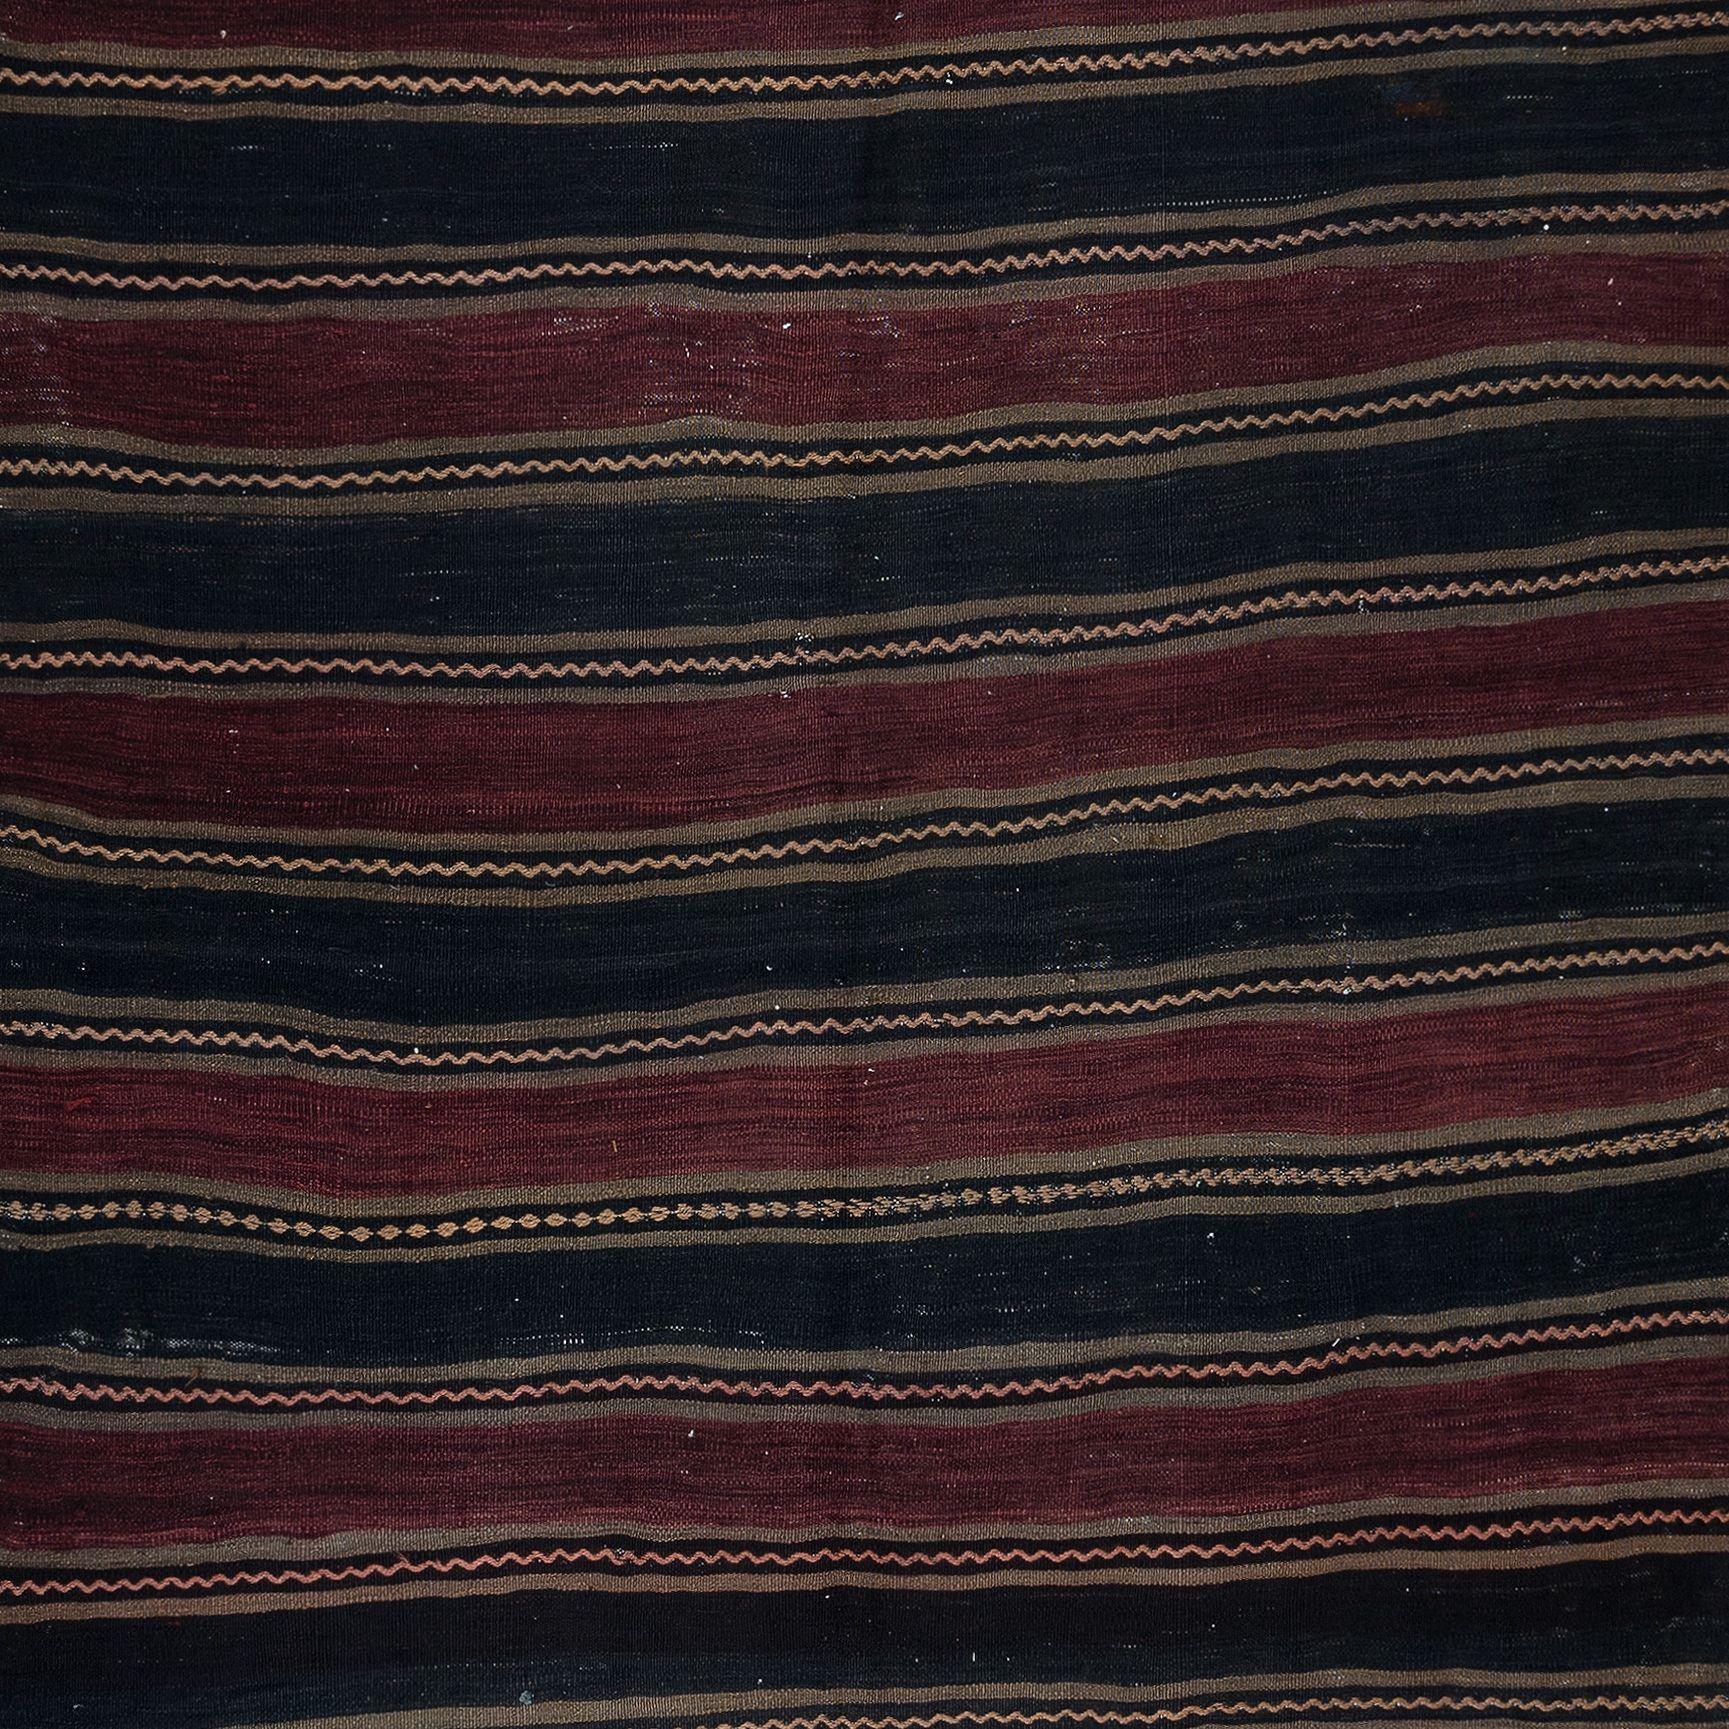 20th Century 5.2x11 Ft Hand-Woven Striped Turkish Kilim Rug, FlatWeave Vintage Wool Carpet For Sale